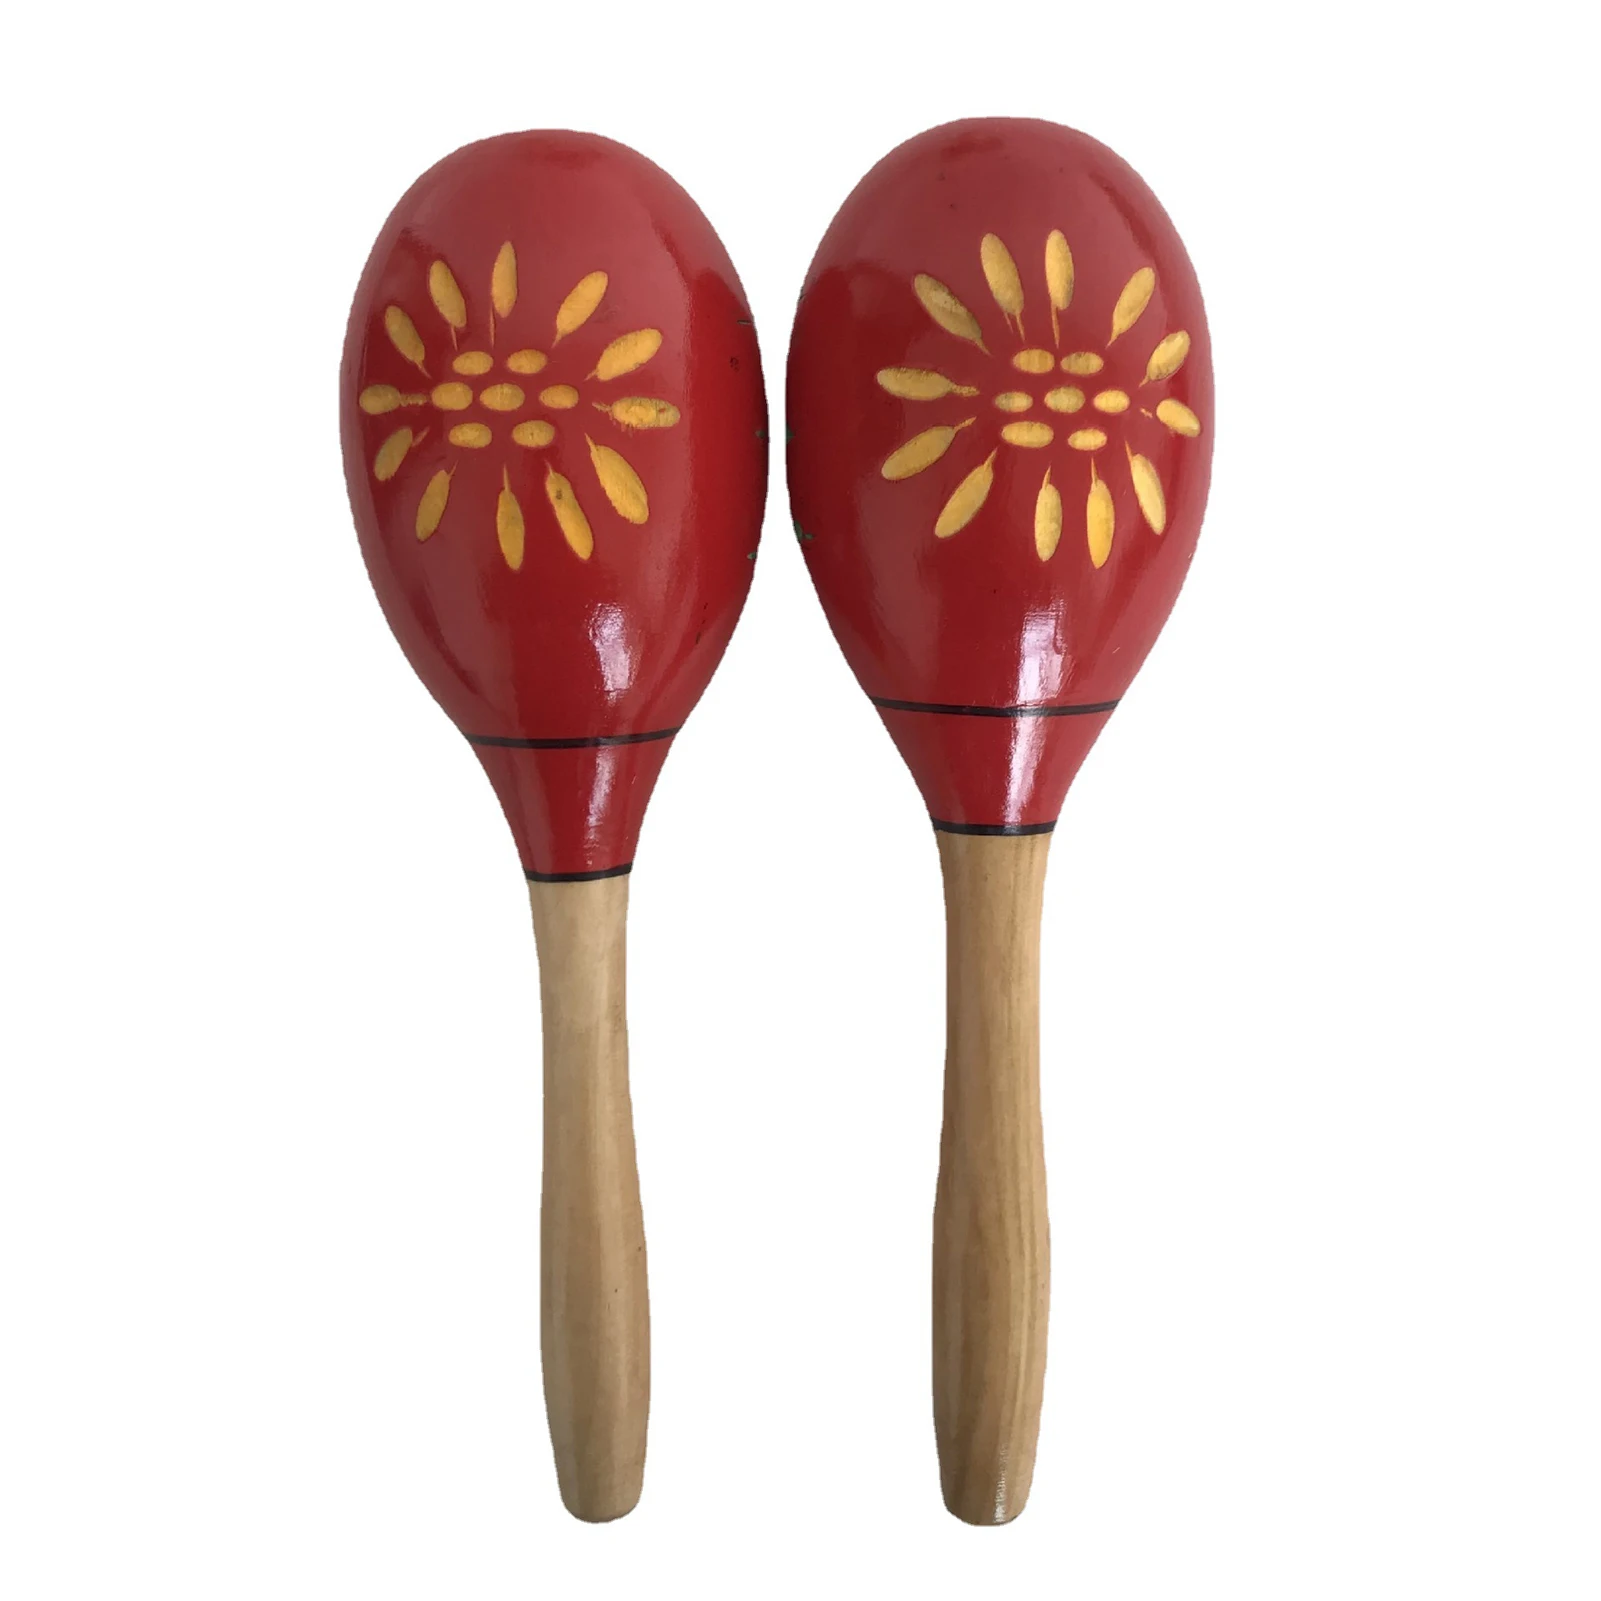 Percussion Musical Instruments  Maracas Percussion Instrument